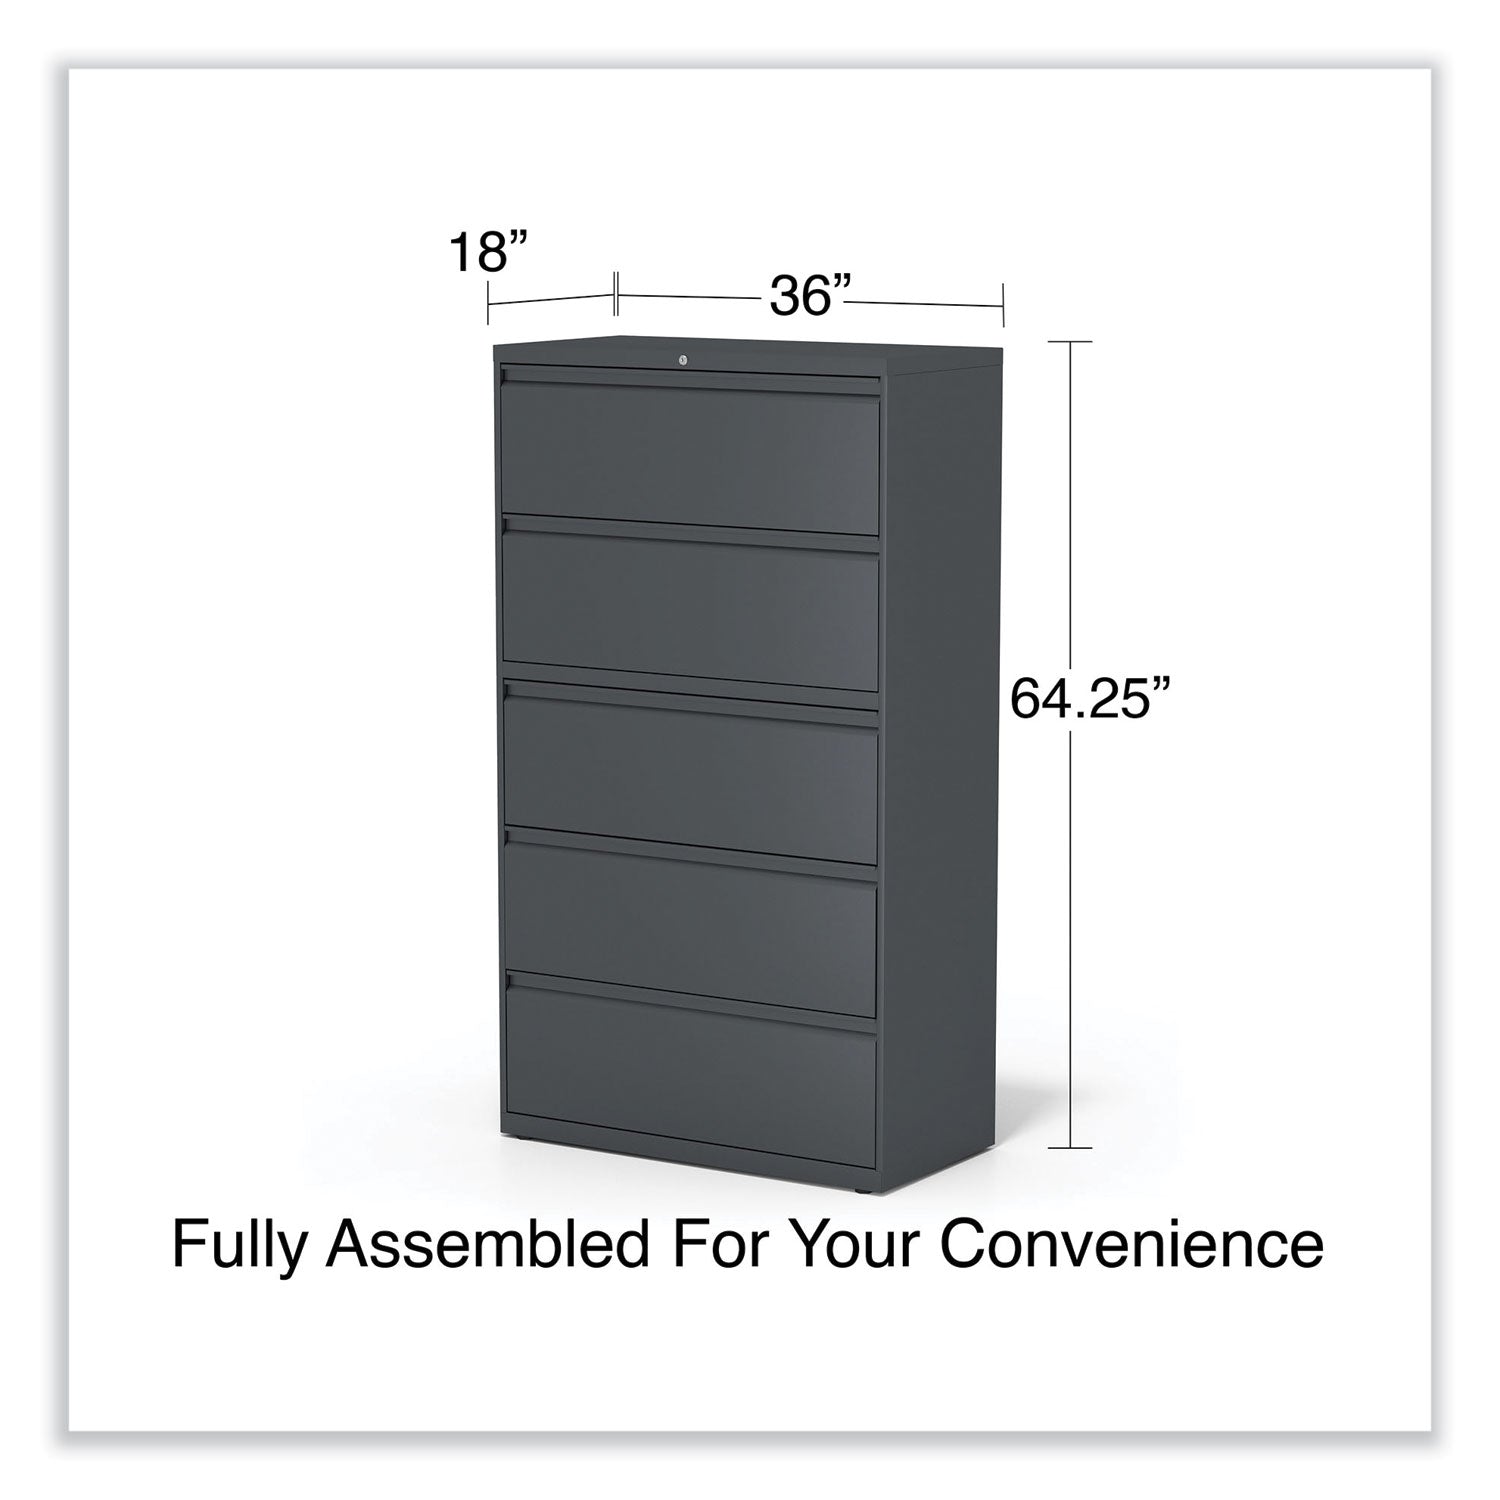 lateral-file-5-legal-letter-a4-a5-size-file-drawers-charcoal-36-x-1863-x-6763_alehlf3667cc - 6